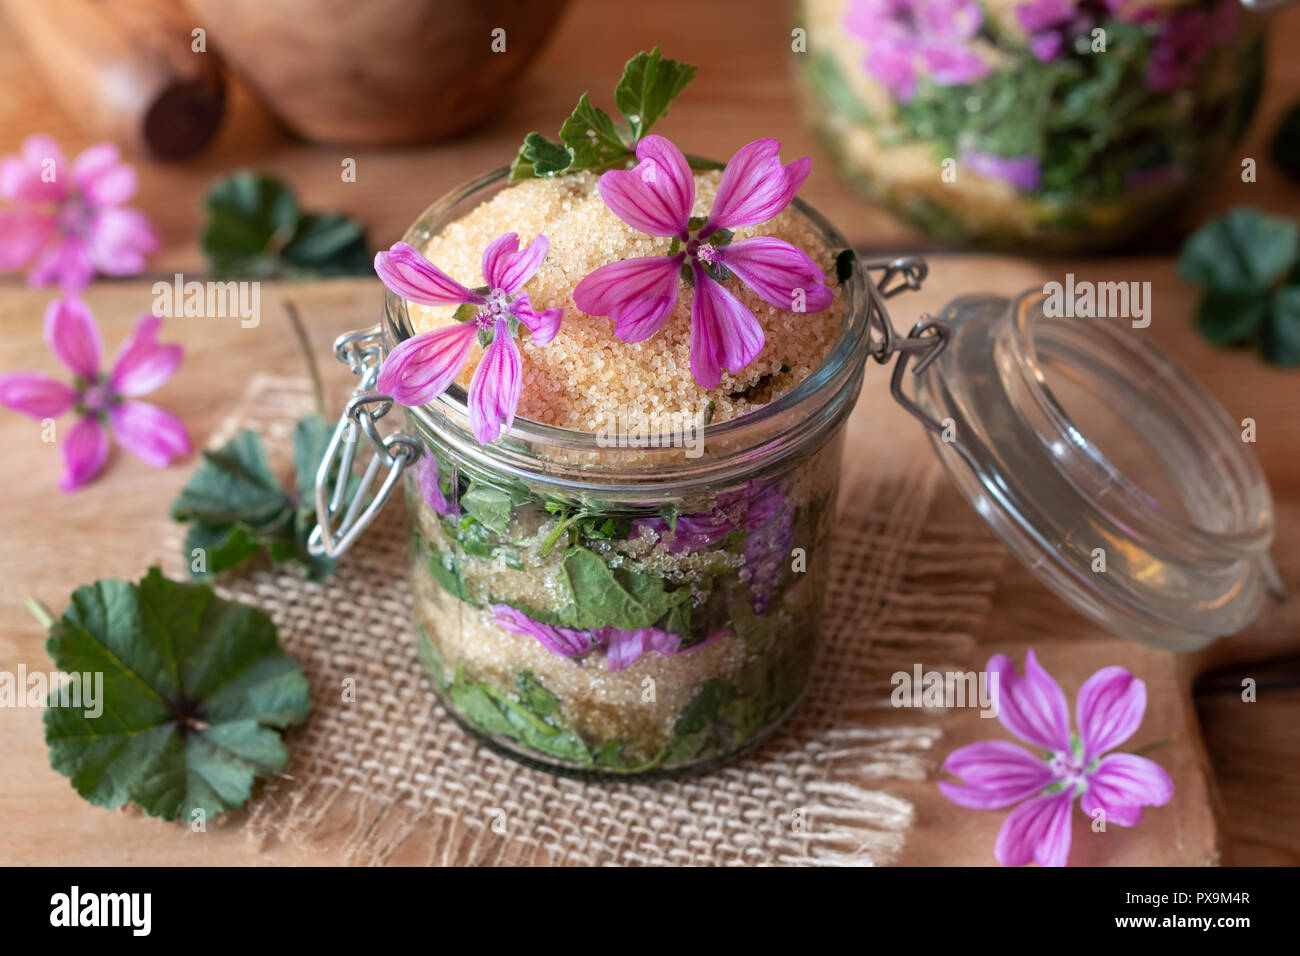 Preparation of herbal syrup against cough from wild common mallow flowers, leaves and cane sugar Stock Photo